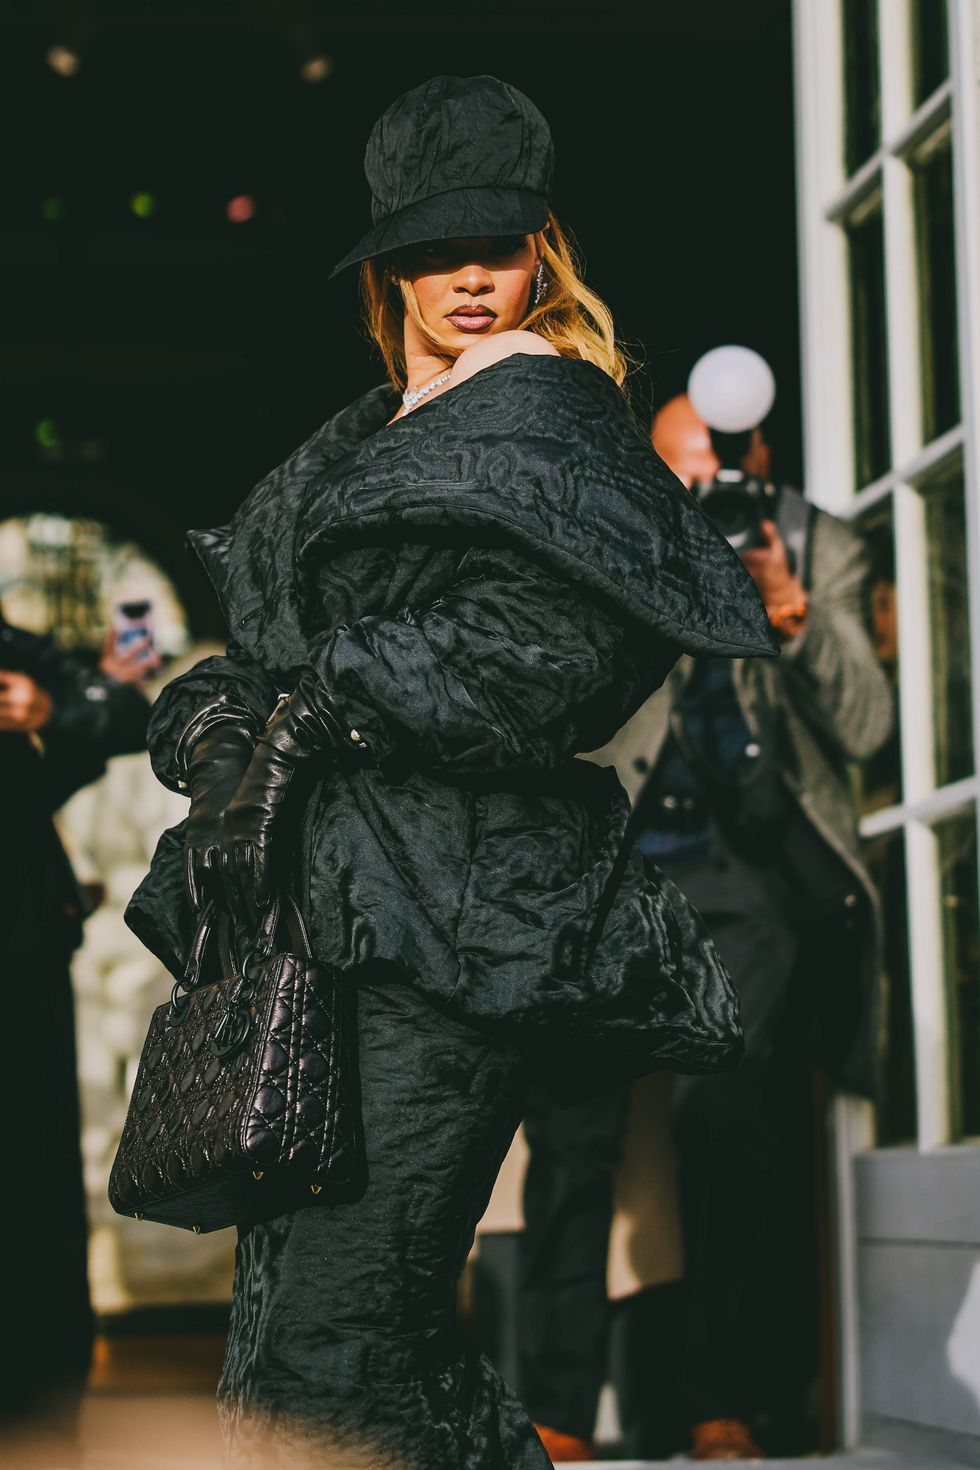 The Best Street Style Photos From Couture Fashion Week in Paris